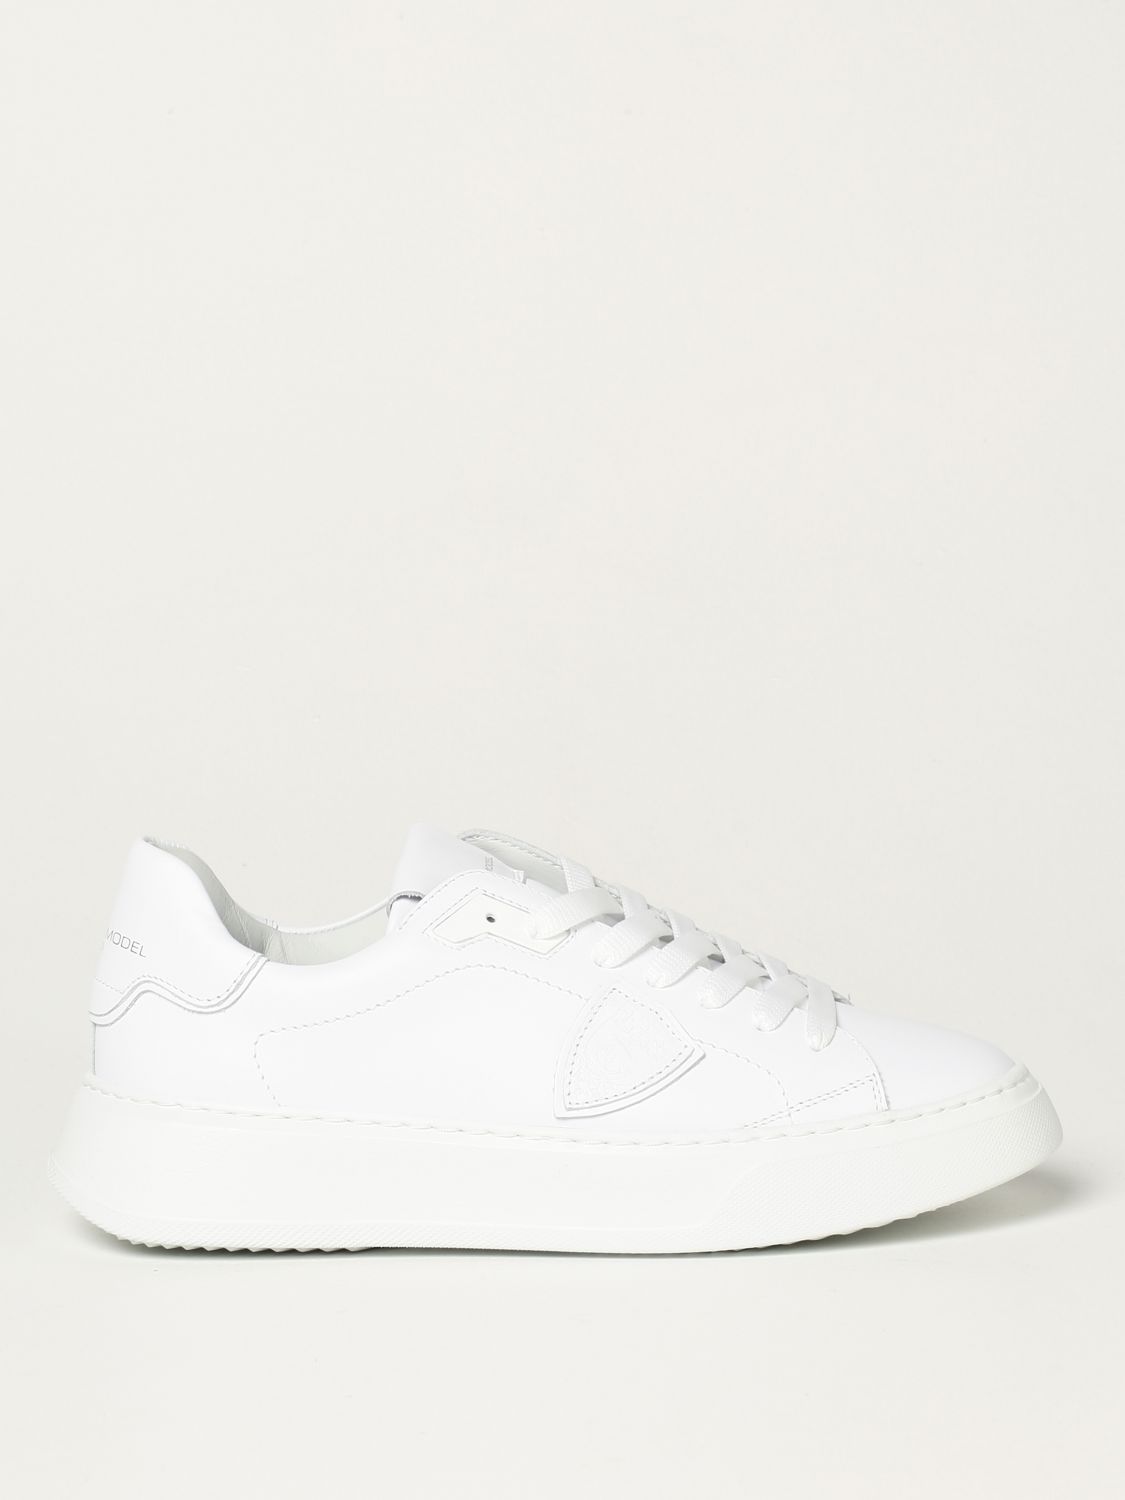 Baskets Philippe Model: Chaussures femme Philippe Model blanc 1